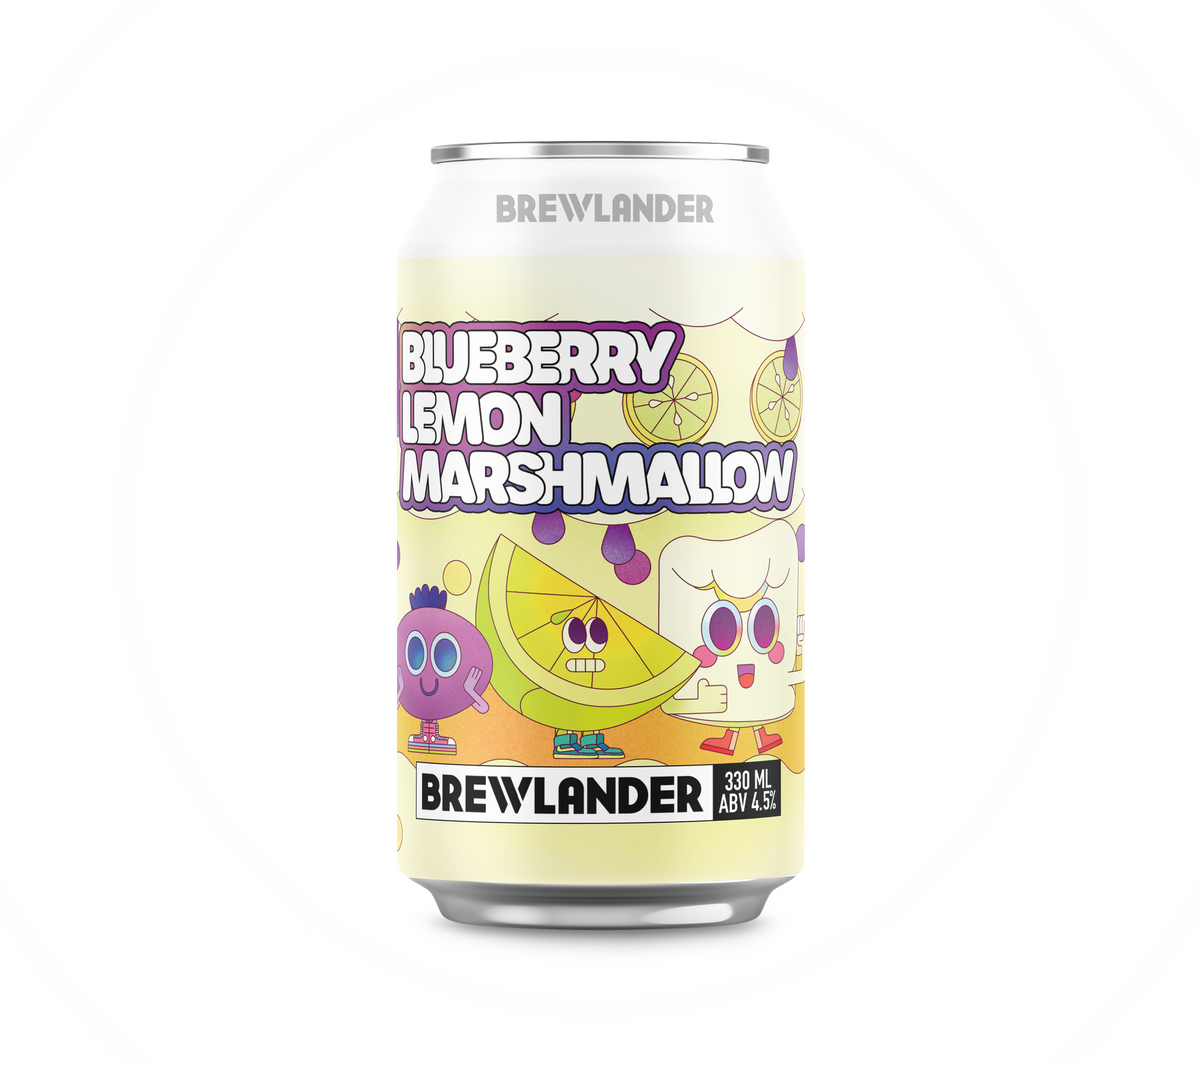 local singapore craft beer brewery award winning pastry sour blueberry lemon marshmallow christmas gift smoothie